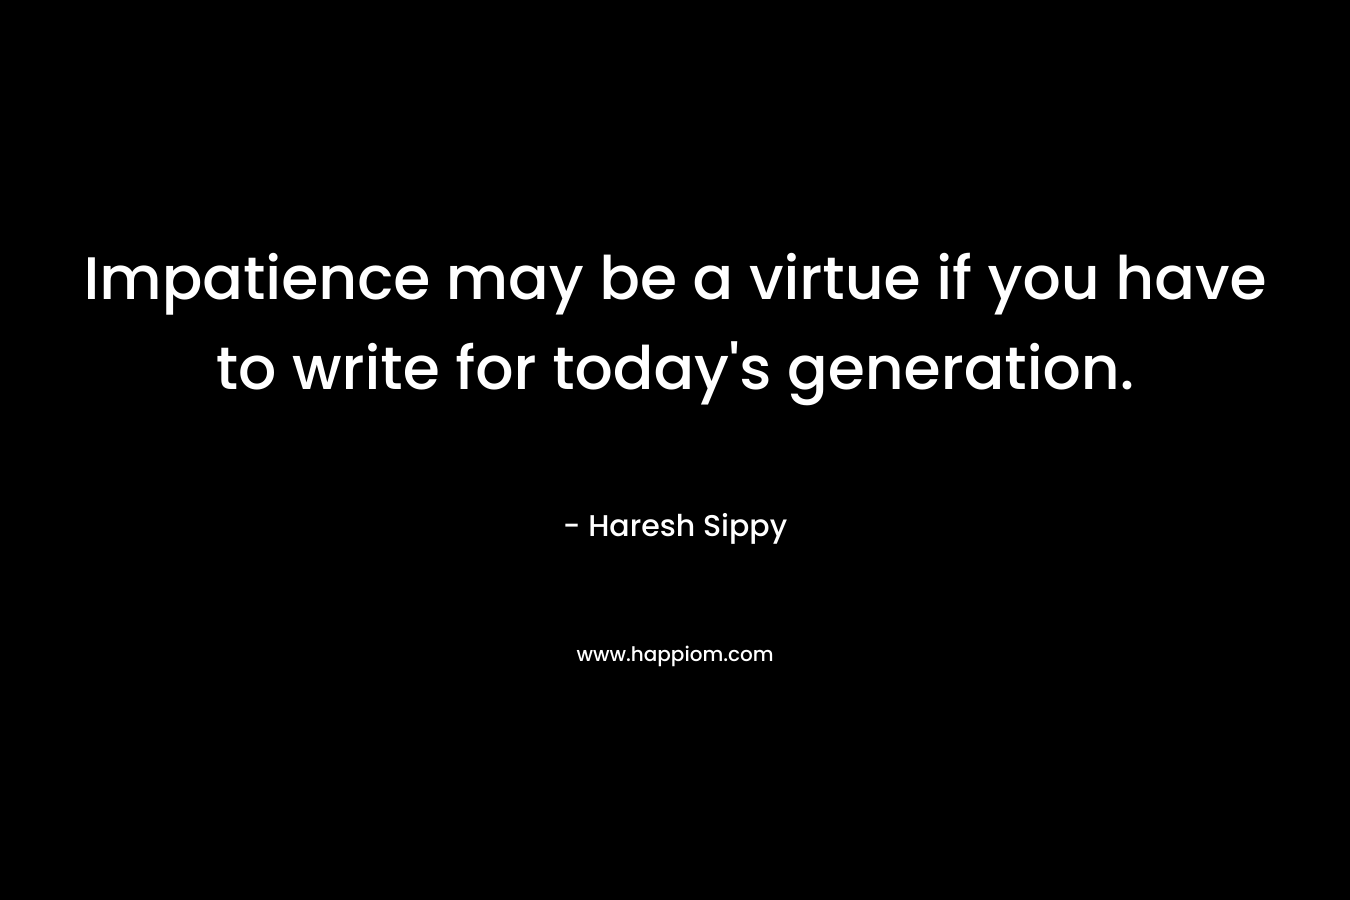 Impatience may be a virtue if you have to write for today’s generation. – Haresh Sippy